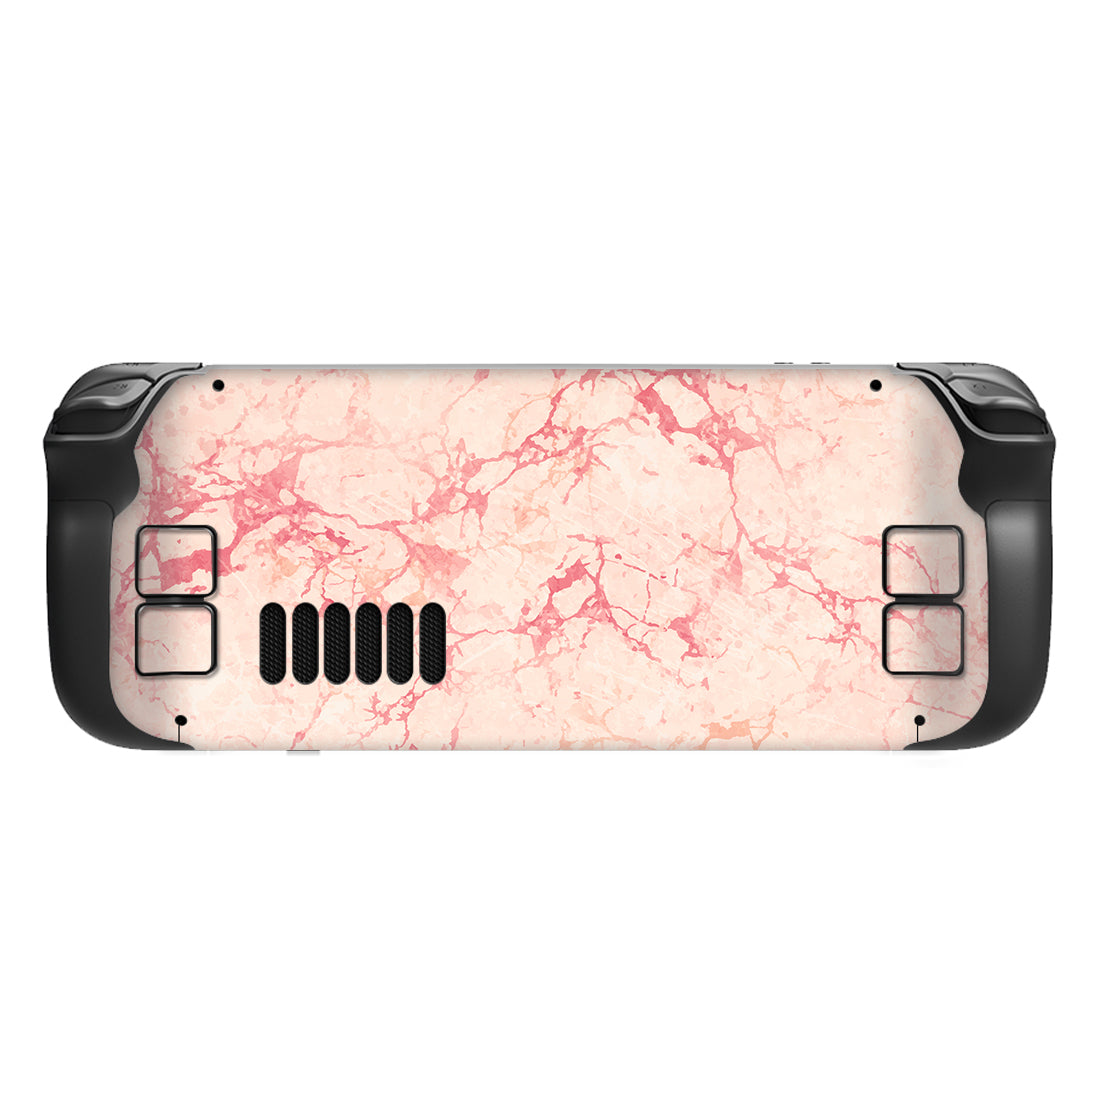 PlayVital Full Set Protective Skin Decal for Steam Deck, Custom Stickers Vinyl Cover for Steam Deck Handheld Gaming PC - Peach Marble - SDTM032 playvital